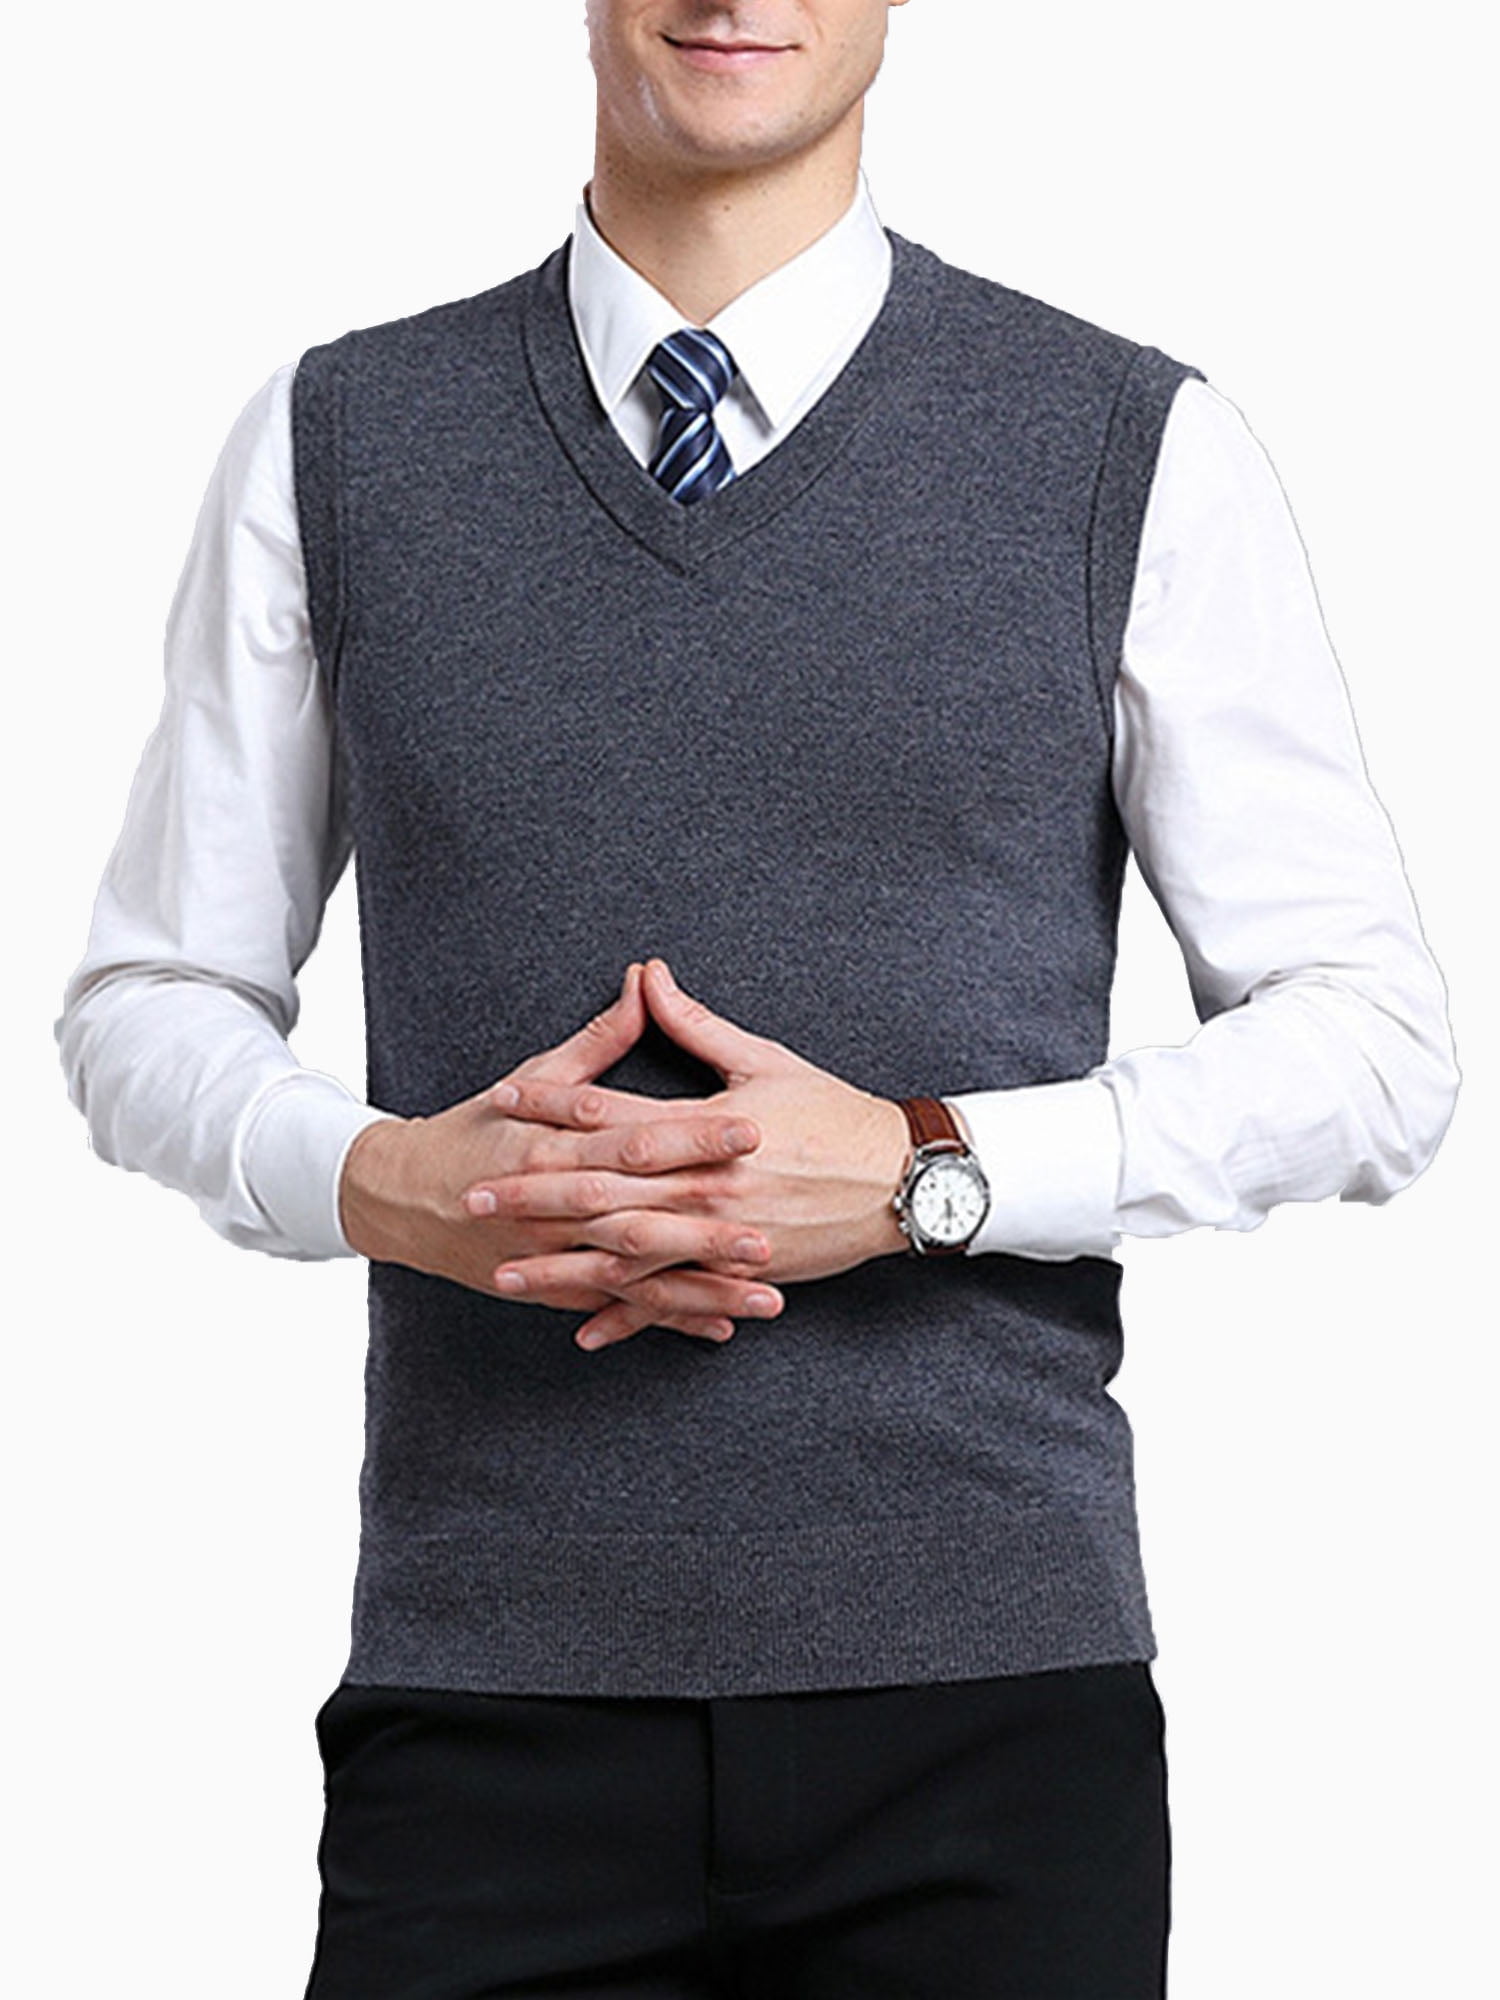 COOFANDY Mens Casual Sweater Vest Lightweight V-Neck Sleeveless Sweaters with Ribbing Edge